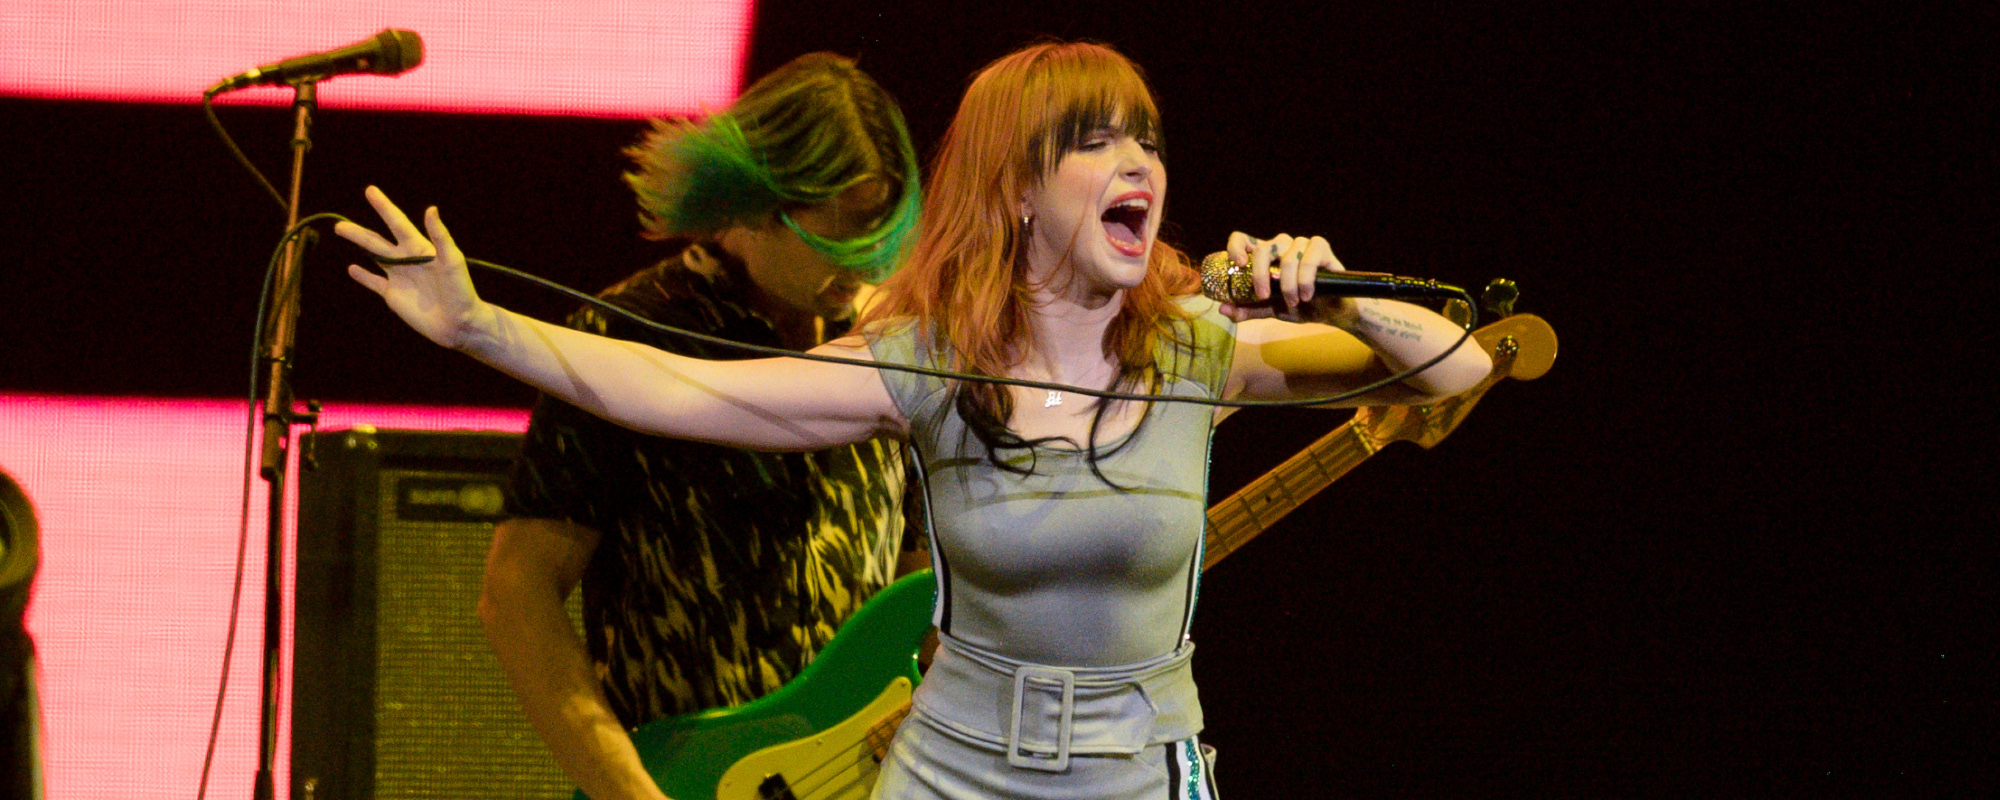 The Meaning Behind “Misery Business” by Paramore and the Controversy Surrounding Its Lyrics